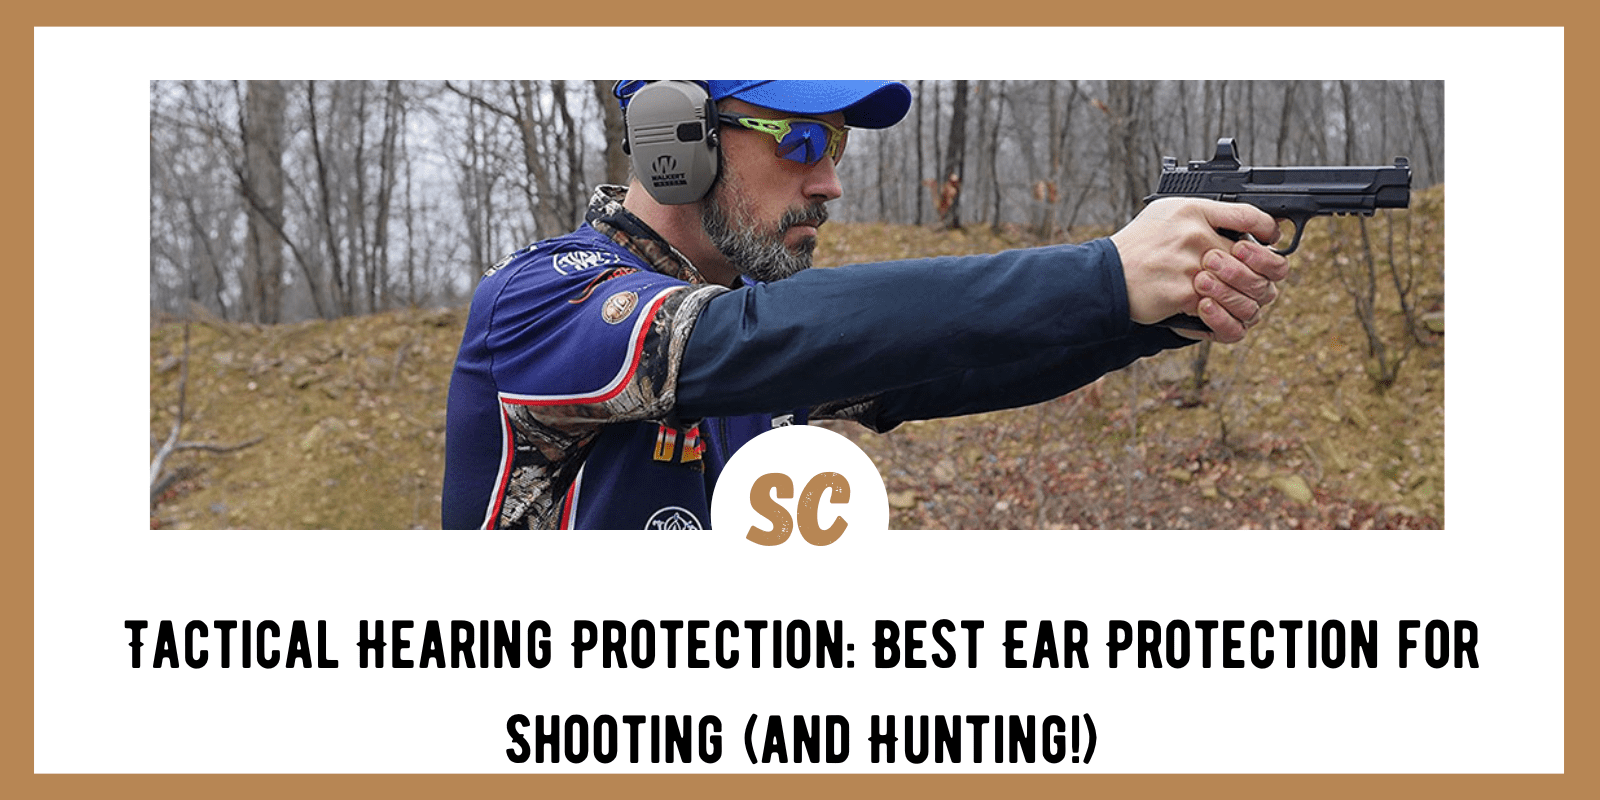 Tactical Hearing Protection: Best Ear Protection for Shooting (and Hunting!)